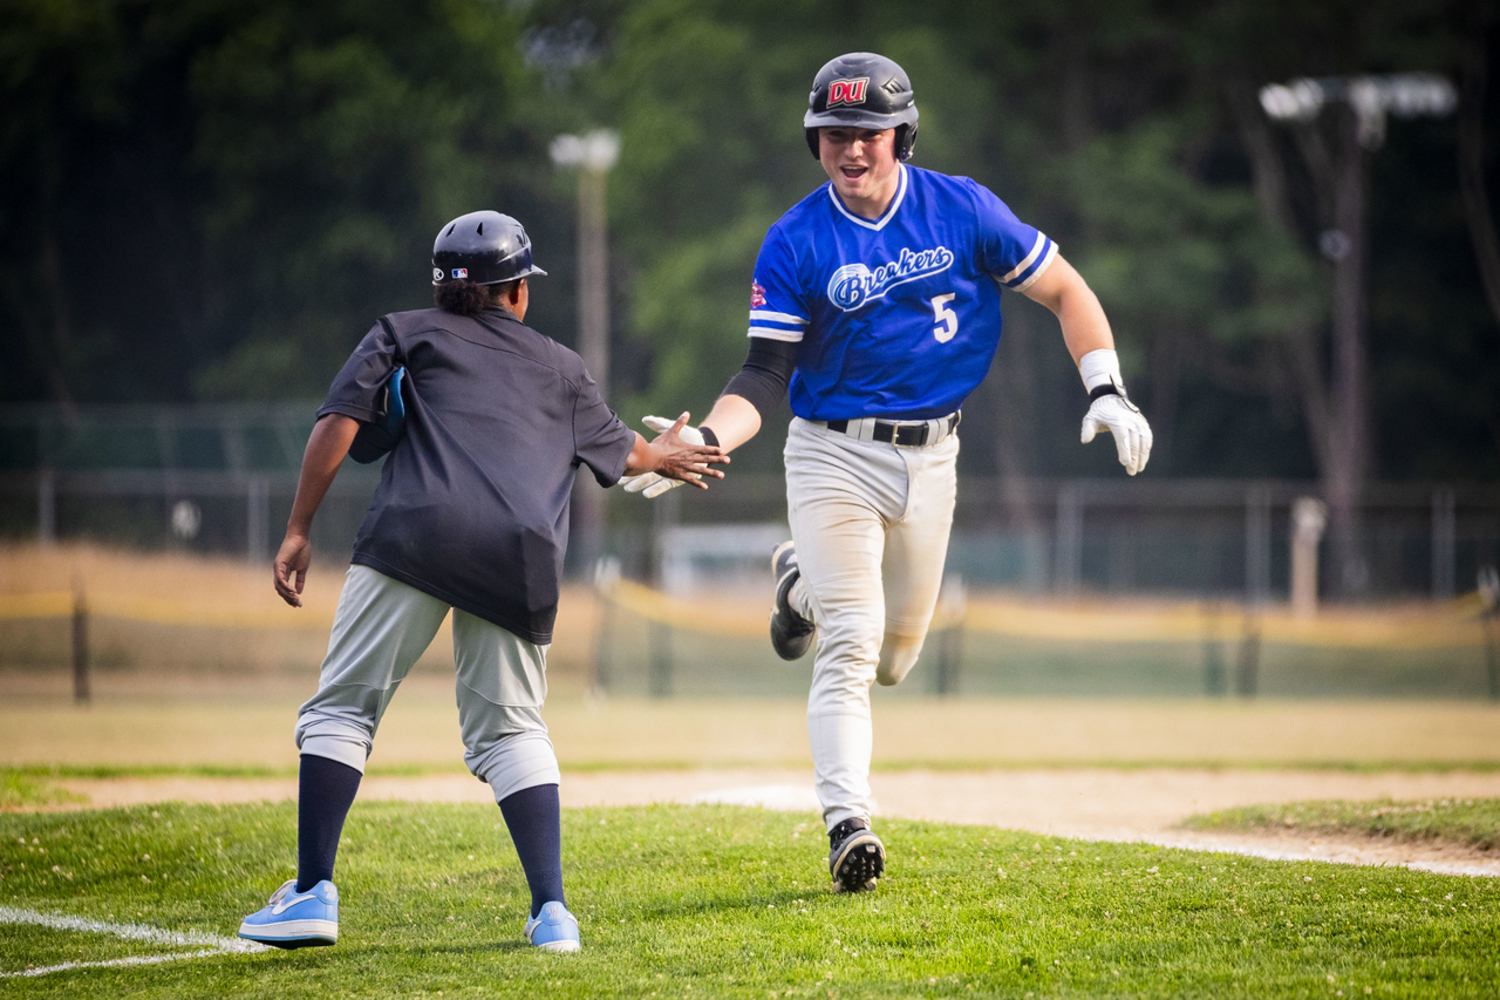 Southampton Breaker Ty Gilligan is pumped up as he rounds third base and heads home on his two-run homer that tied the game at 9-9 in the ninth inning.   DEMETRIUS KAZANAS